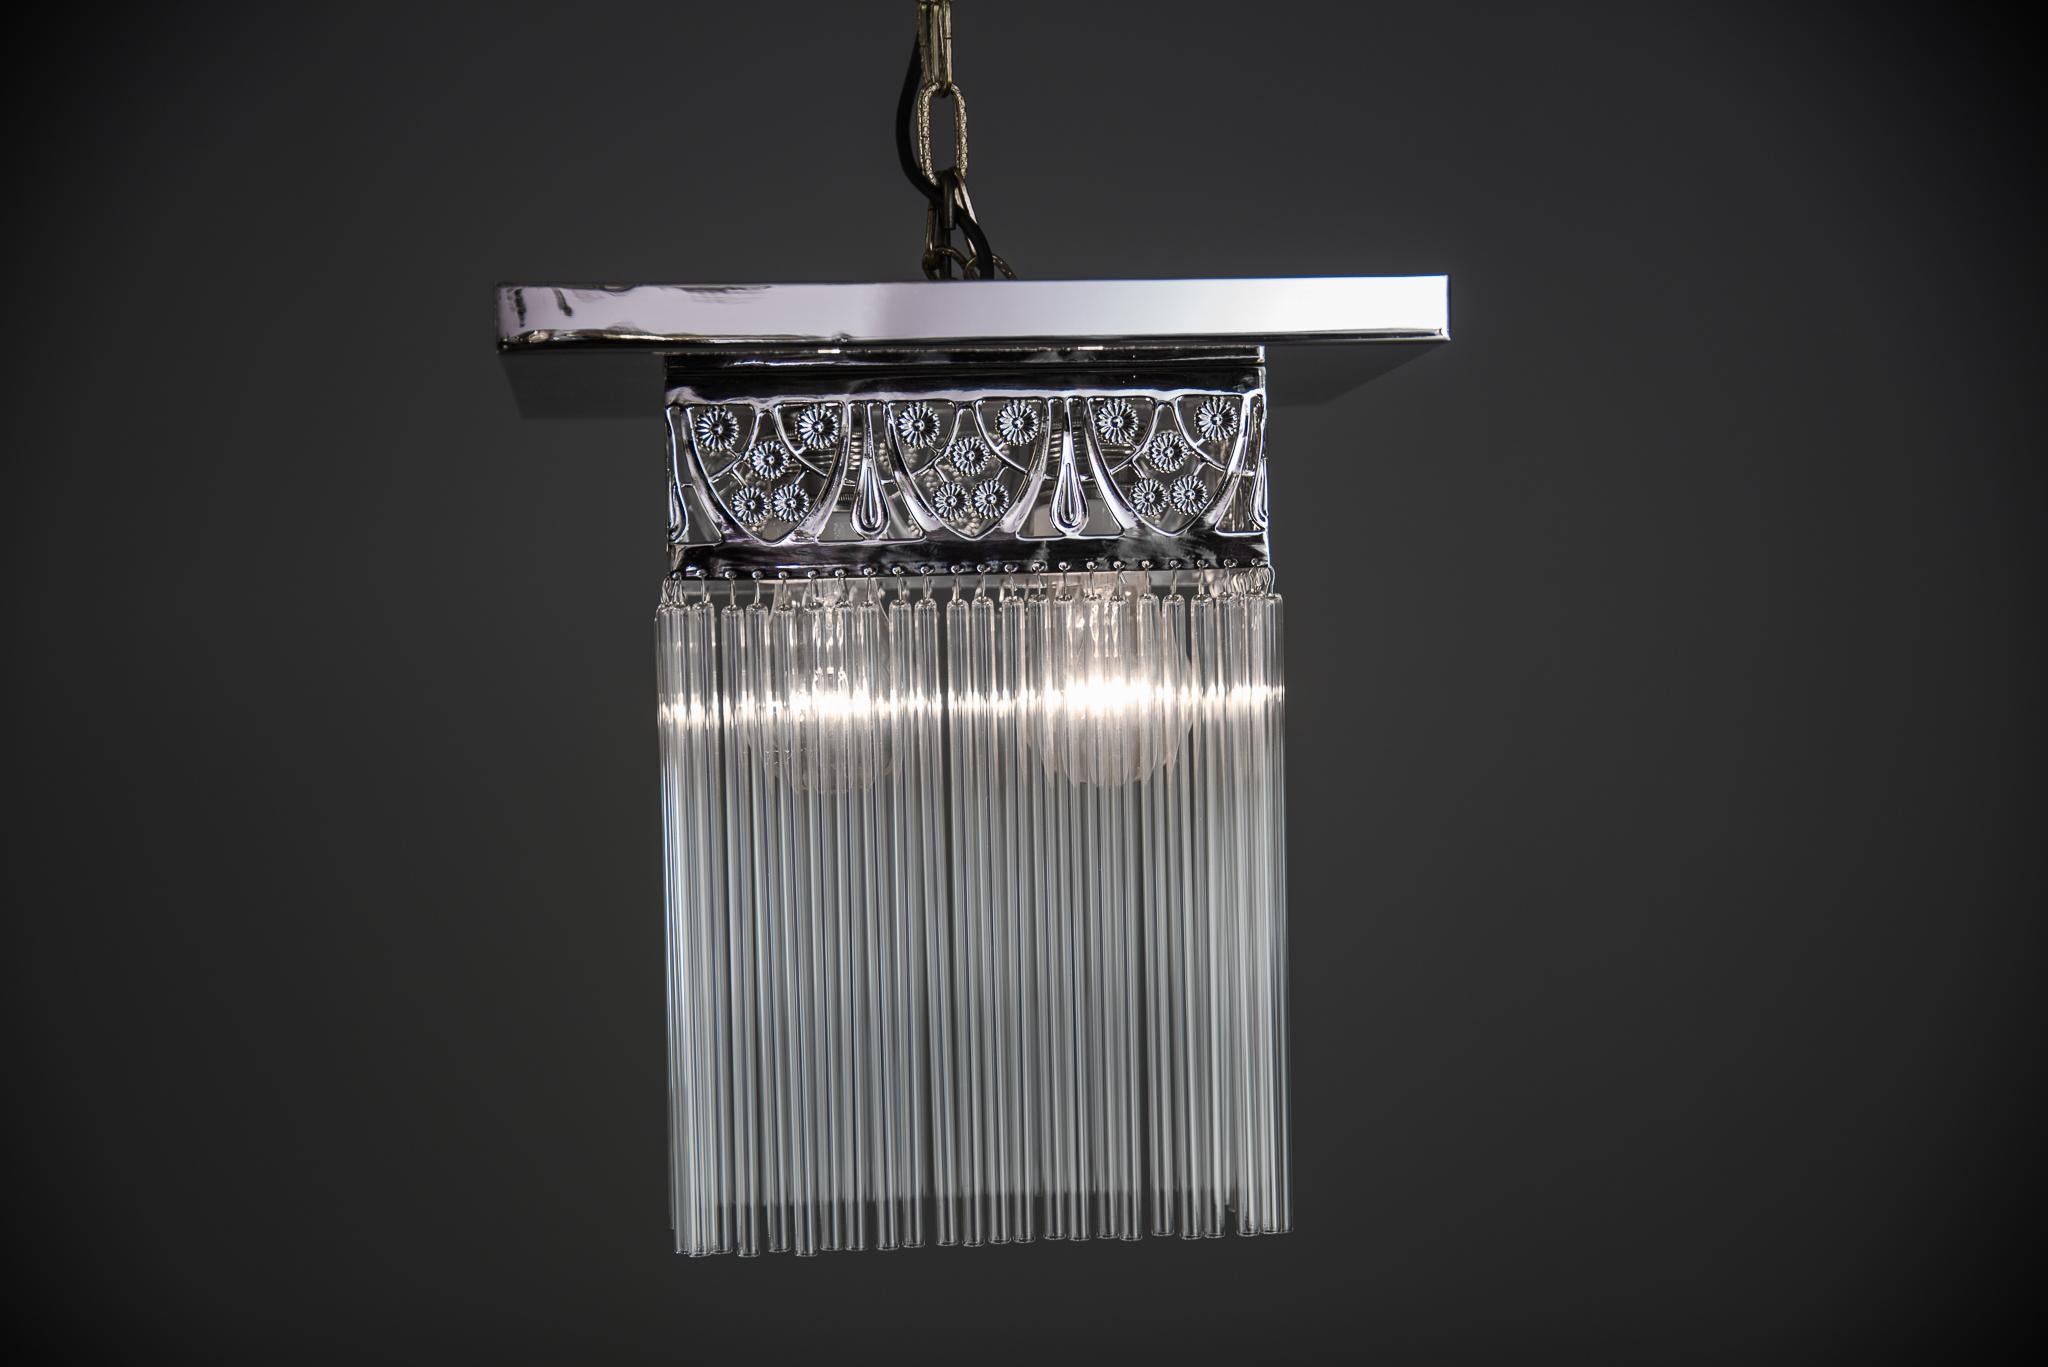 Early 20th Century Rectangular Jugendstil Nickel-Plated Ceiling Lamp with Glass Sticks